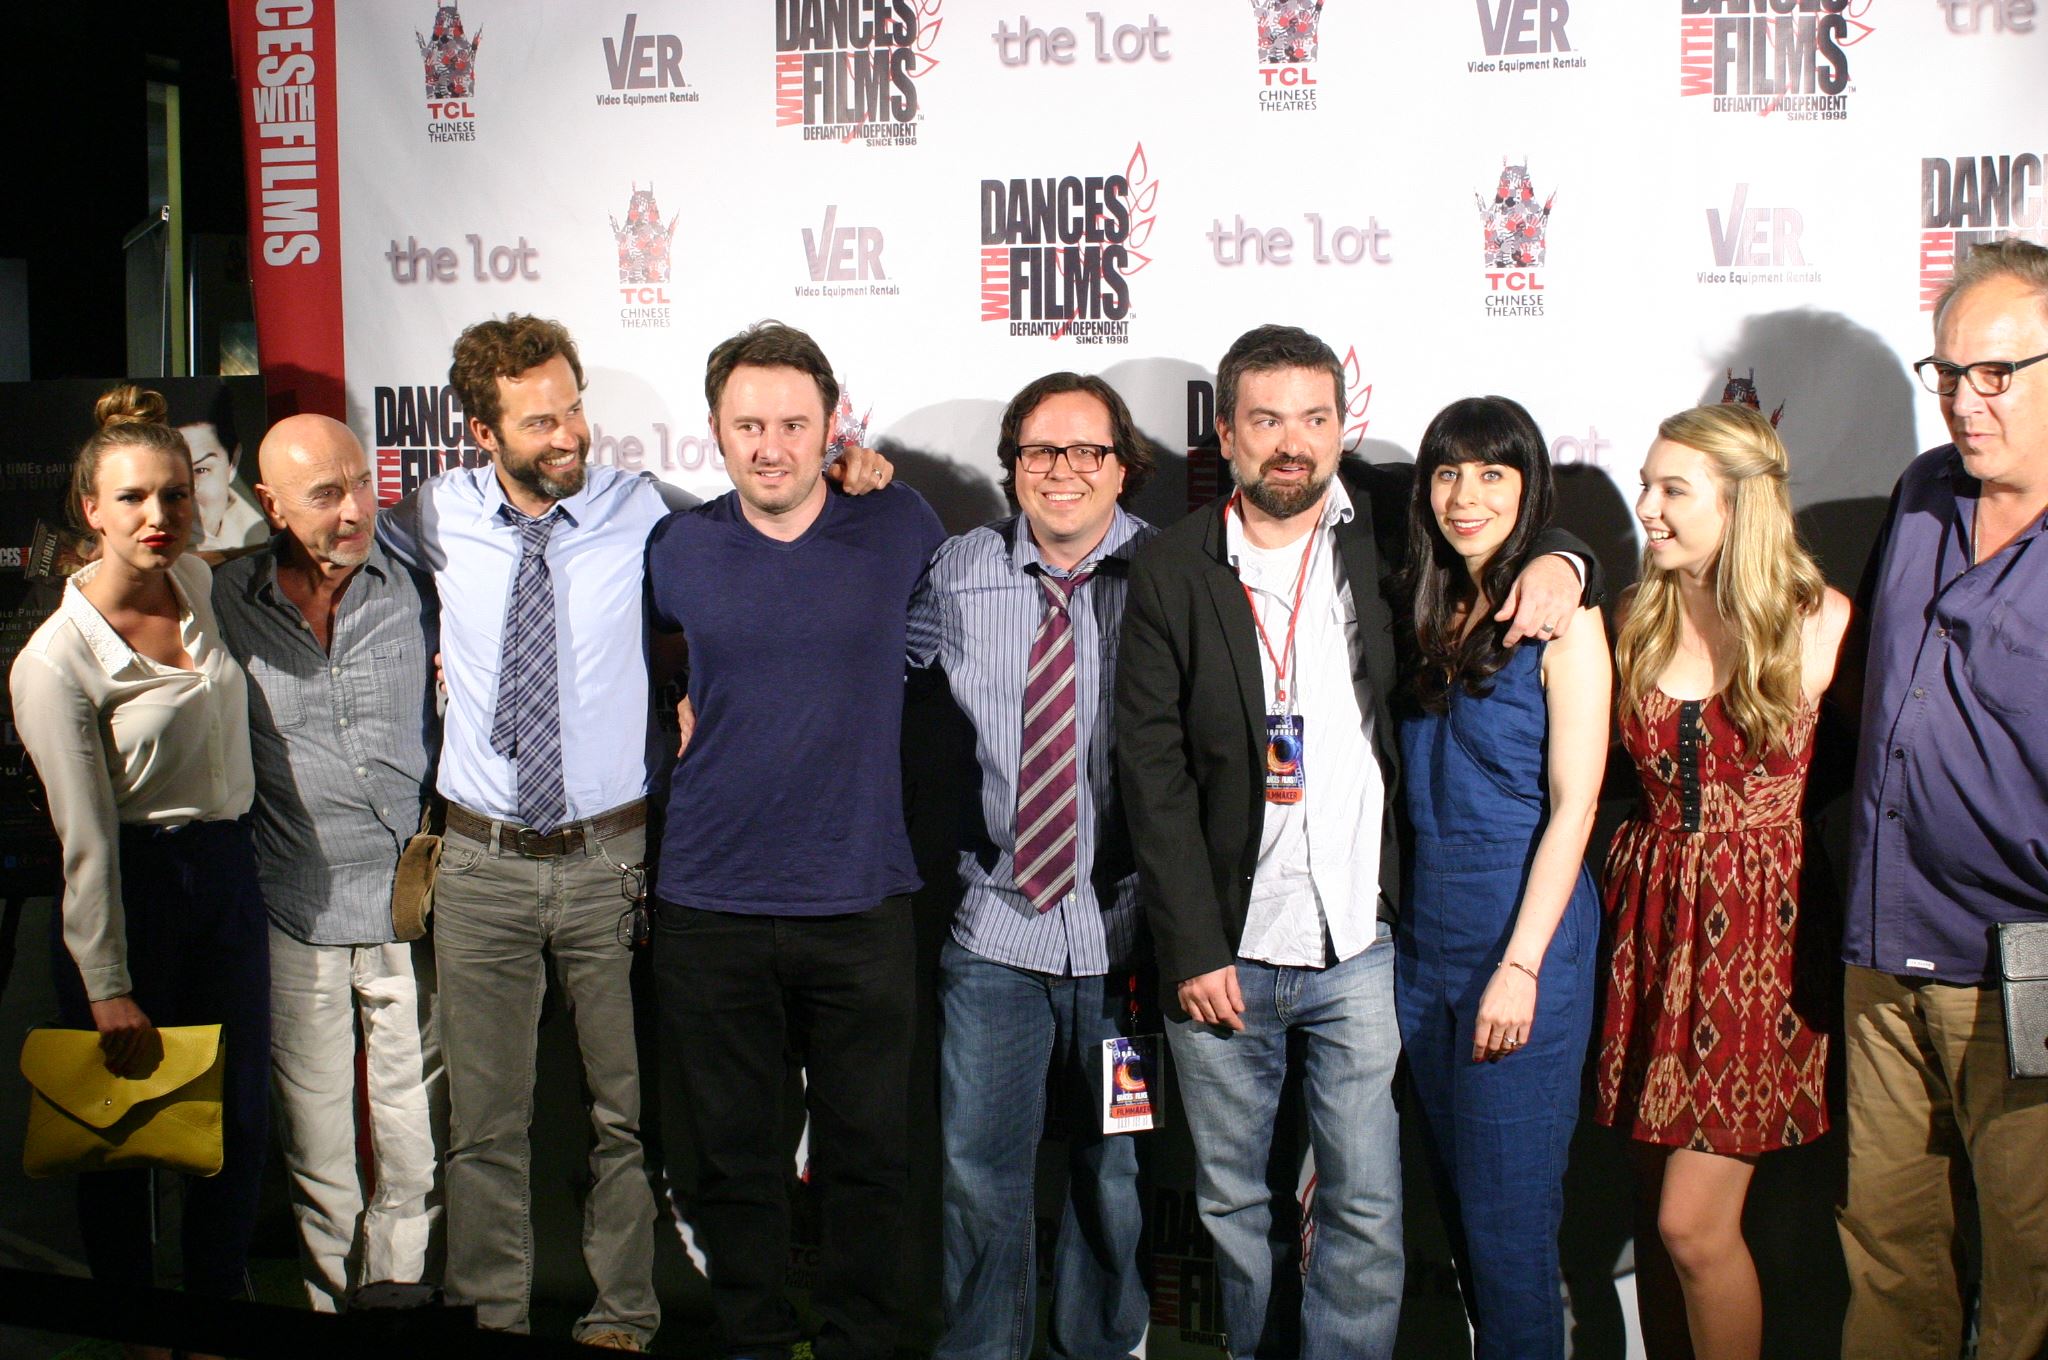 Audrey Lynn Weston and the cast and crew at the L.A. premiere of TRIBUTE